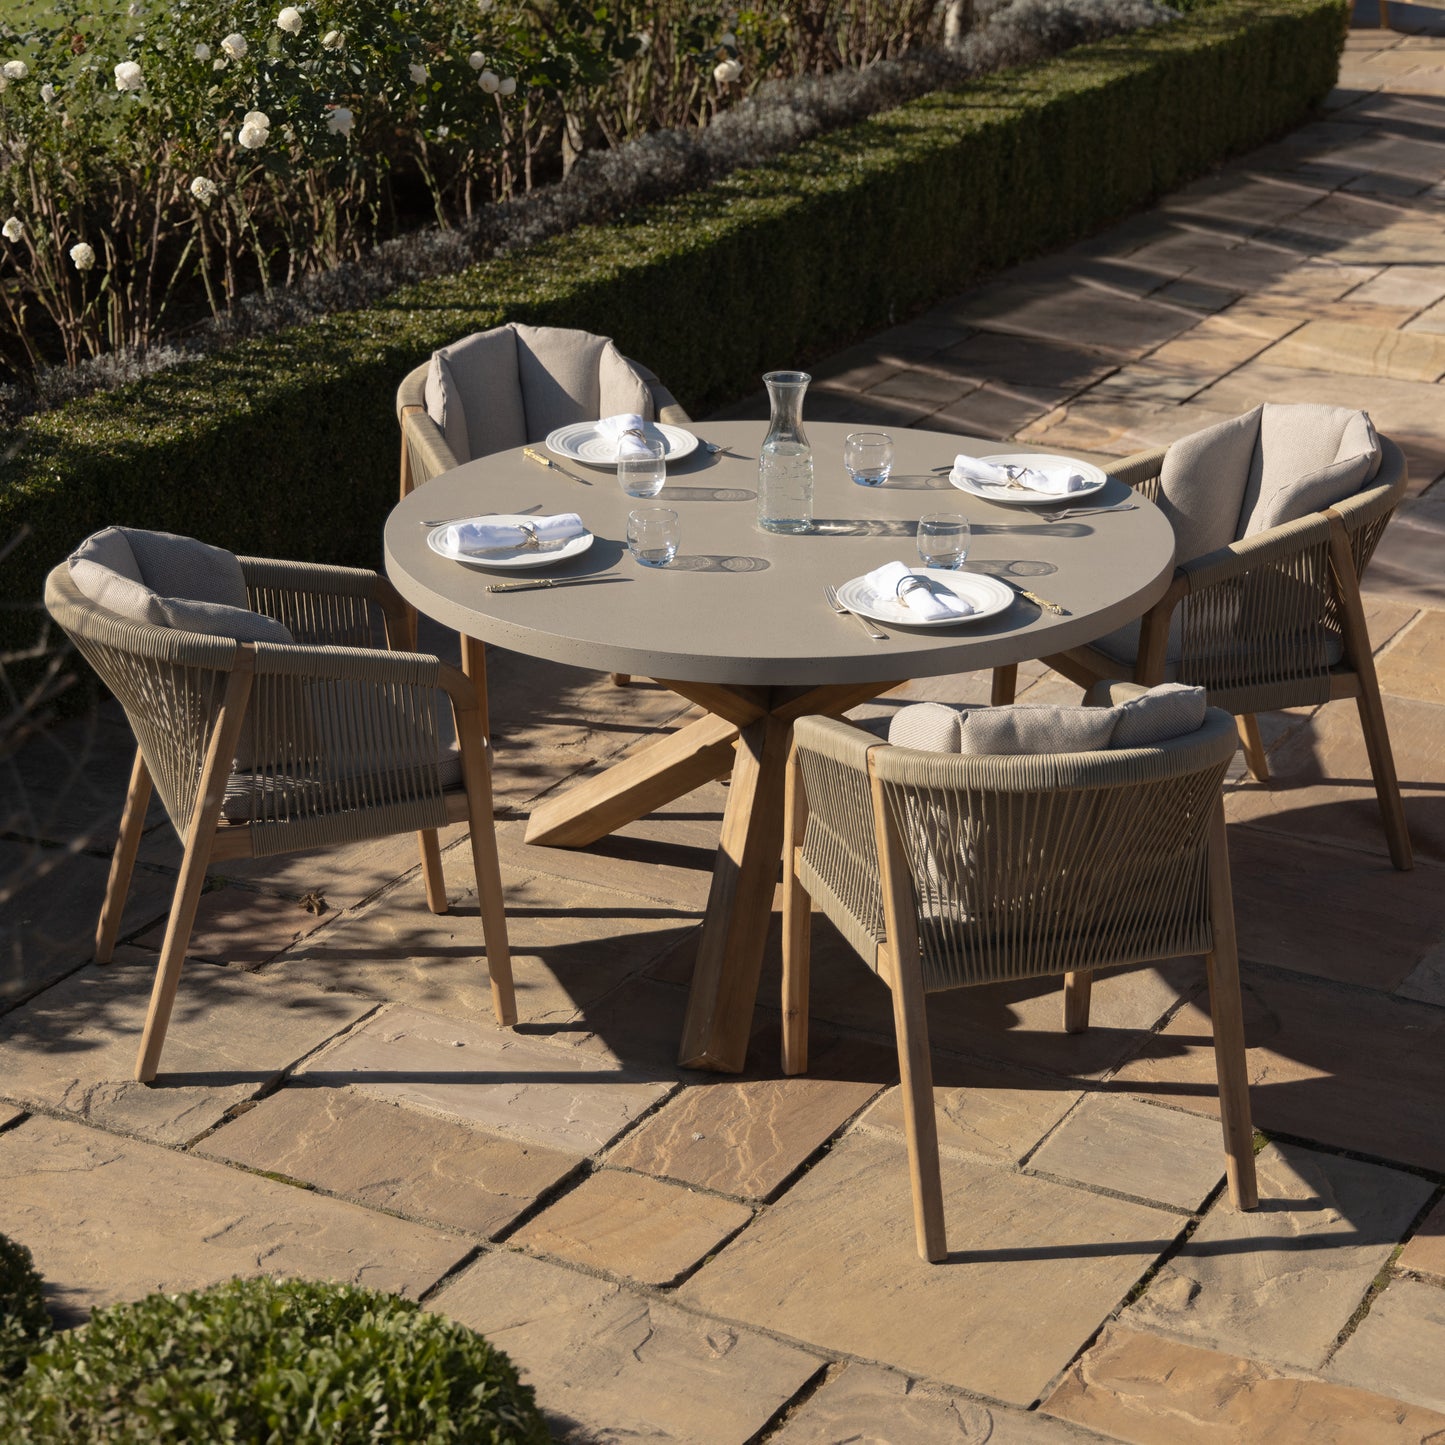 Maze - Martinique Rope Weave 4 Seat Round Dining Set